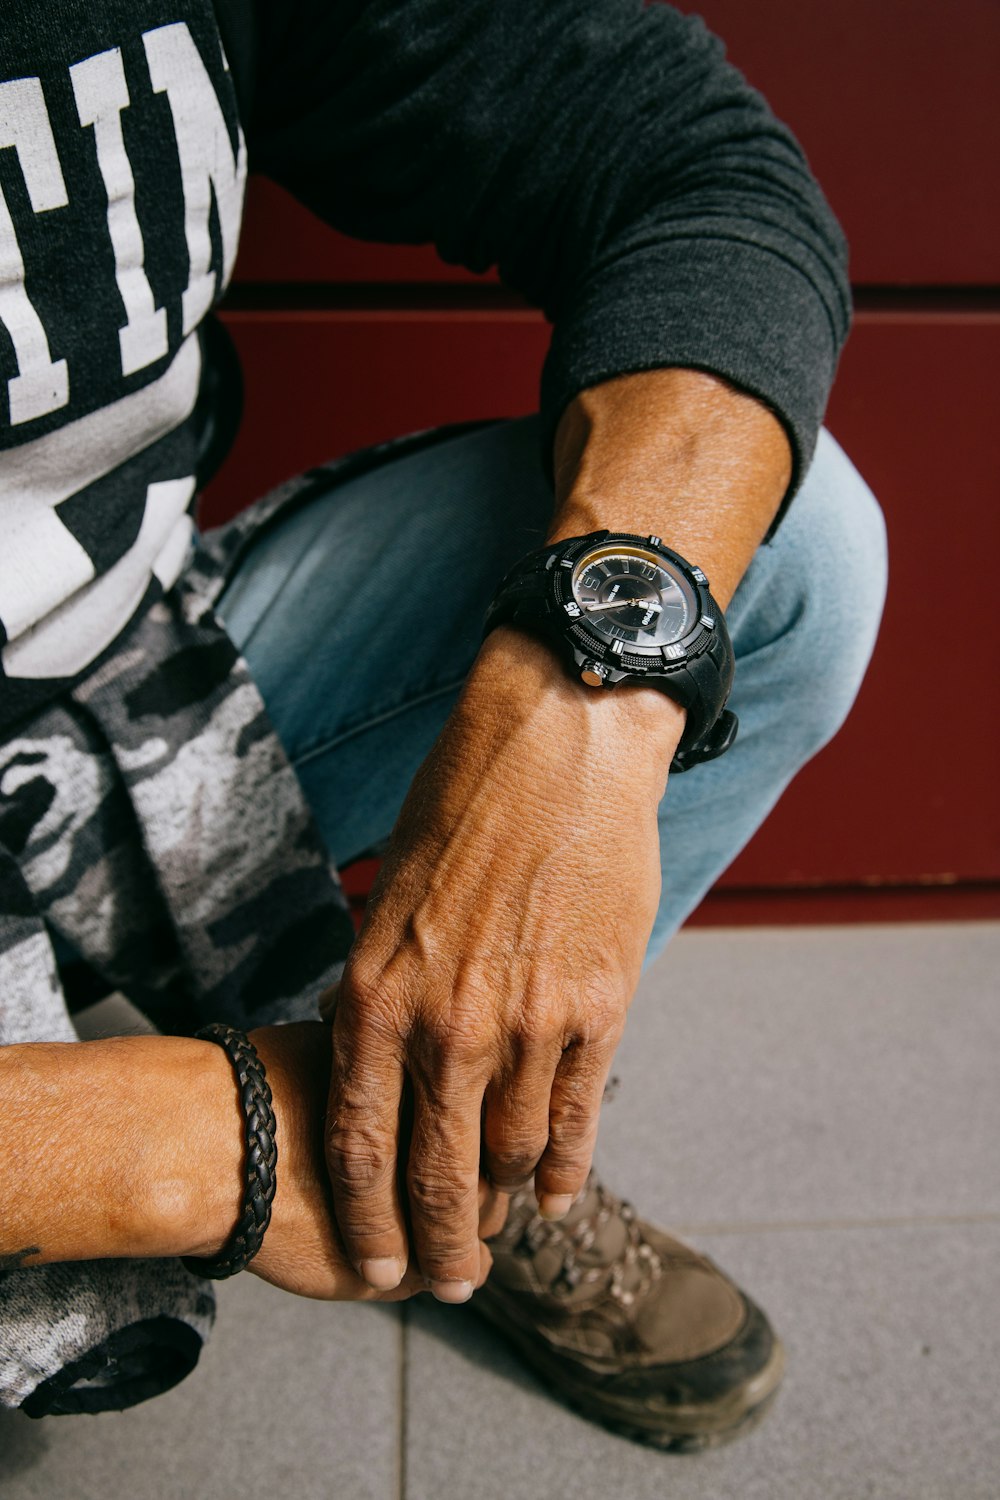 person wearing black and silver round analog watch